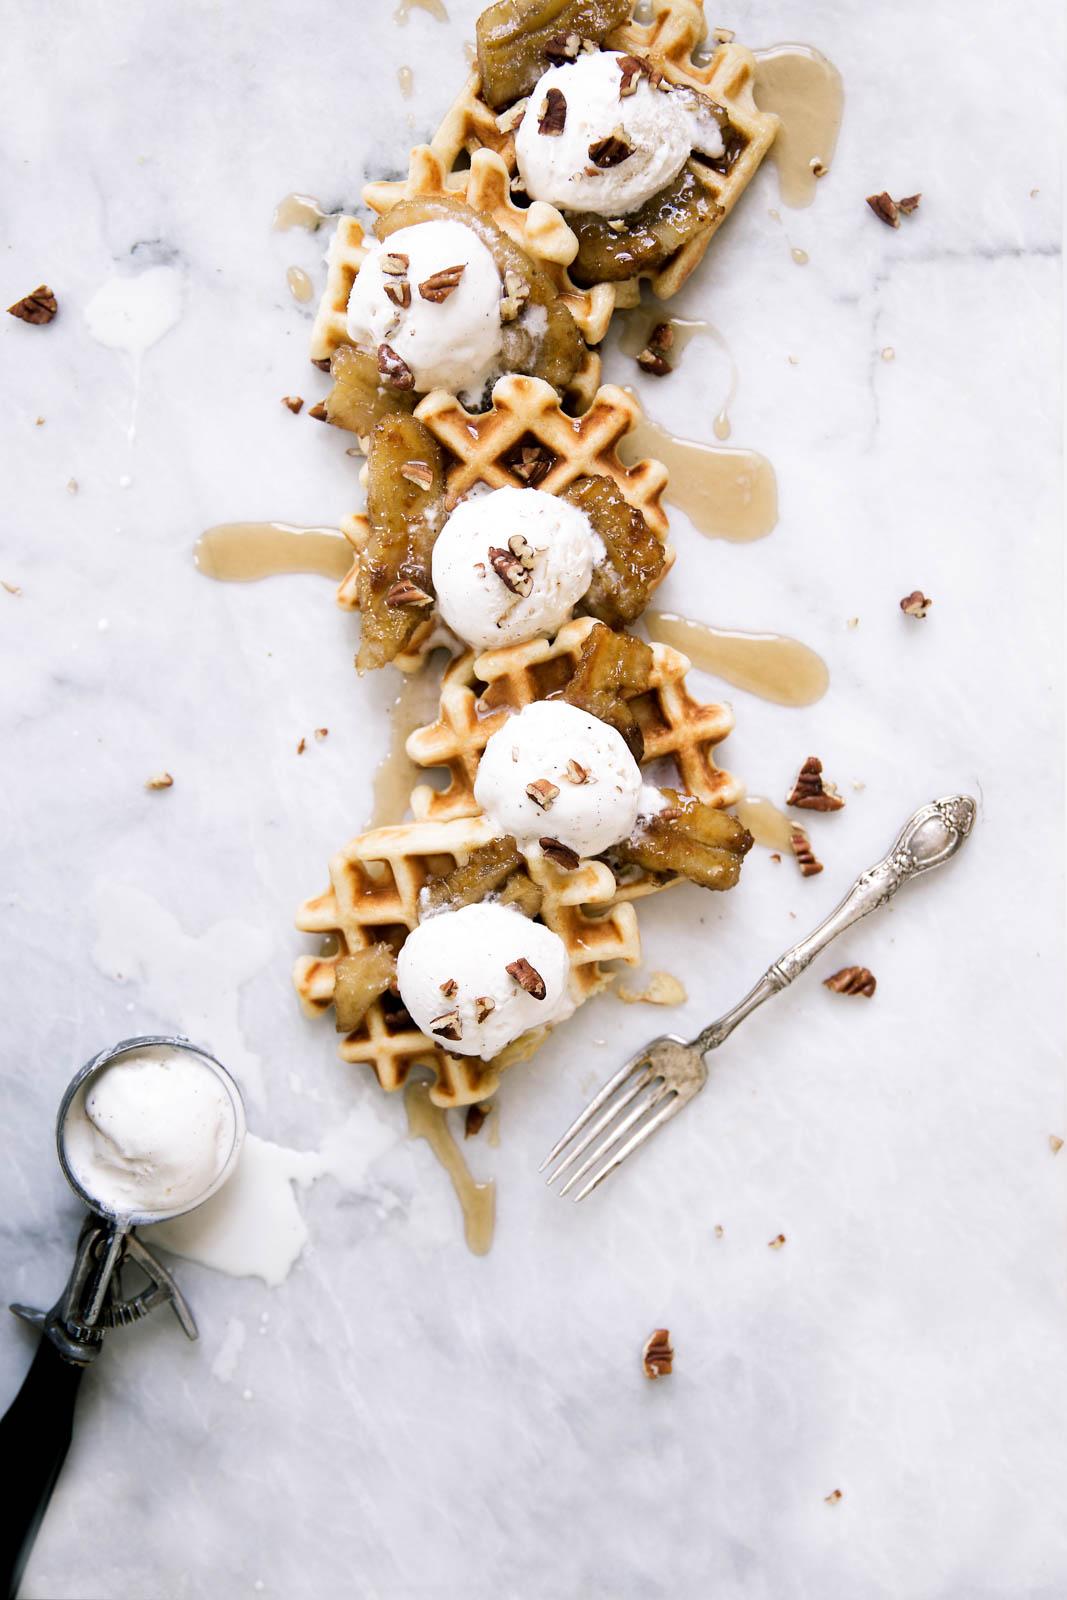 Bananas Foster Waffles made with vanilla ice cream, pecans, and caramelized rum bananas over a pillowy banana rum waffle. Yahm.